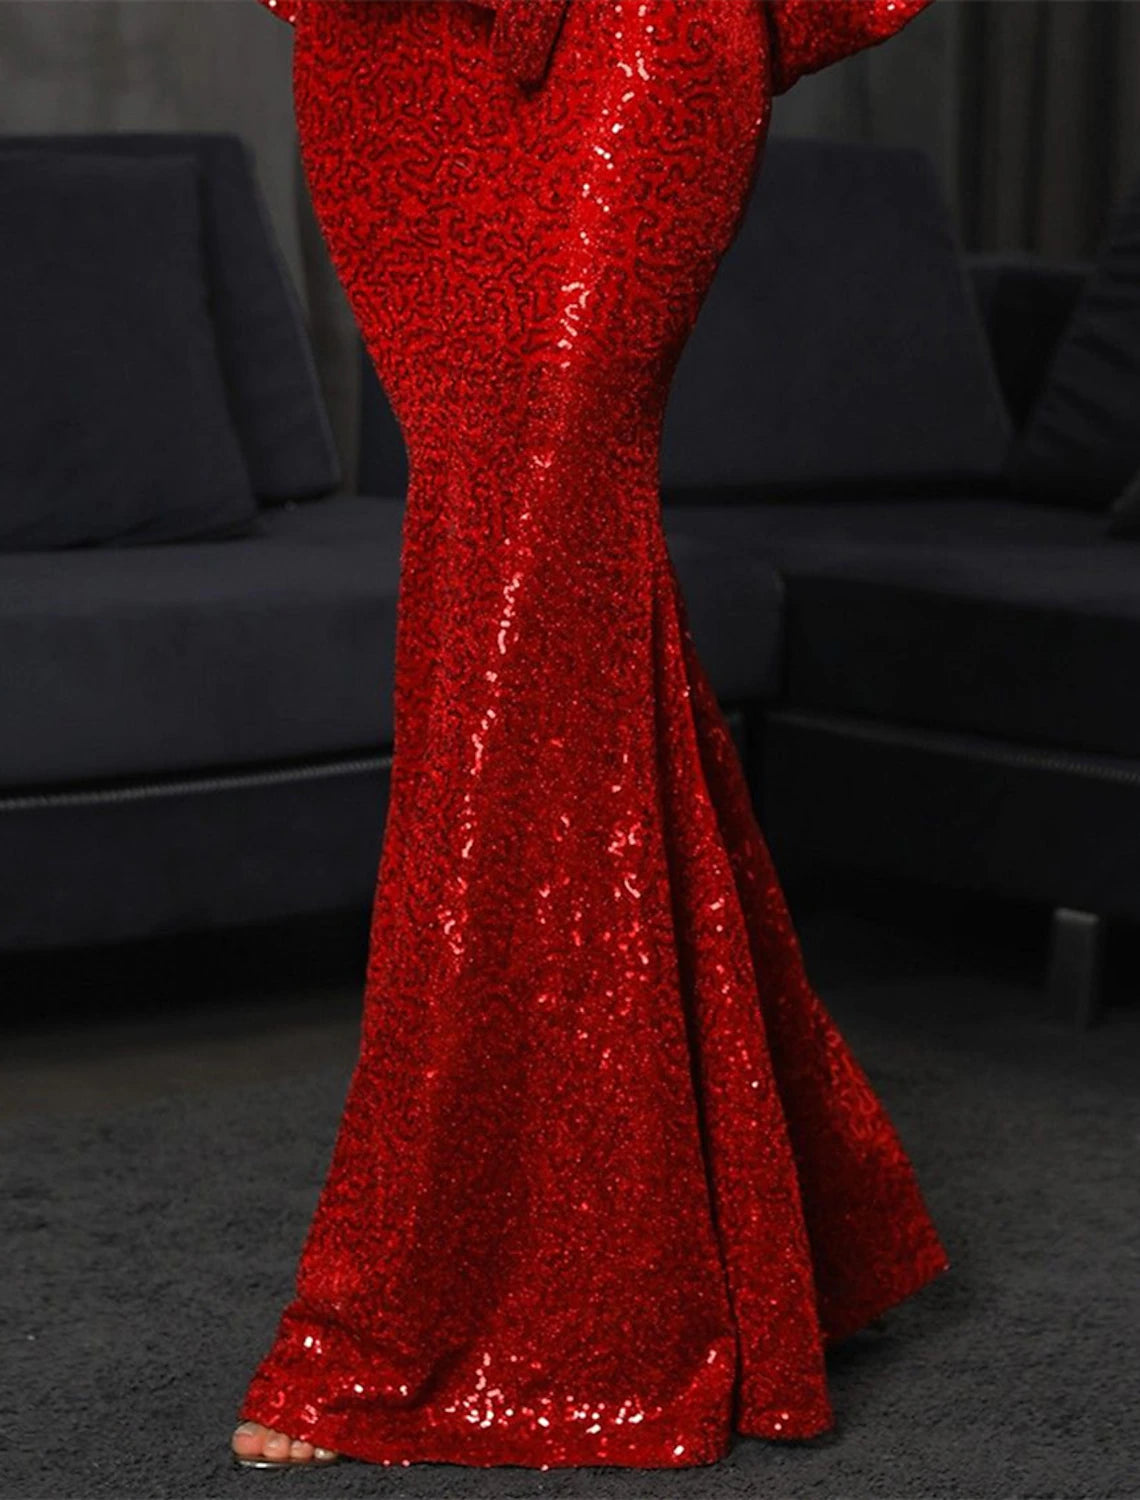 Mermaid Evening Gown Sparkle Christmas Red Green Dress Dress Formal Wedding Guest Floor Length Long Sleeve V Neck Fall Wedding Reception Sequined with Bow(s) Sequin